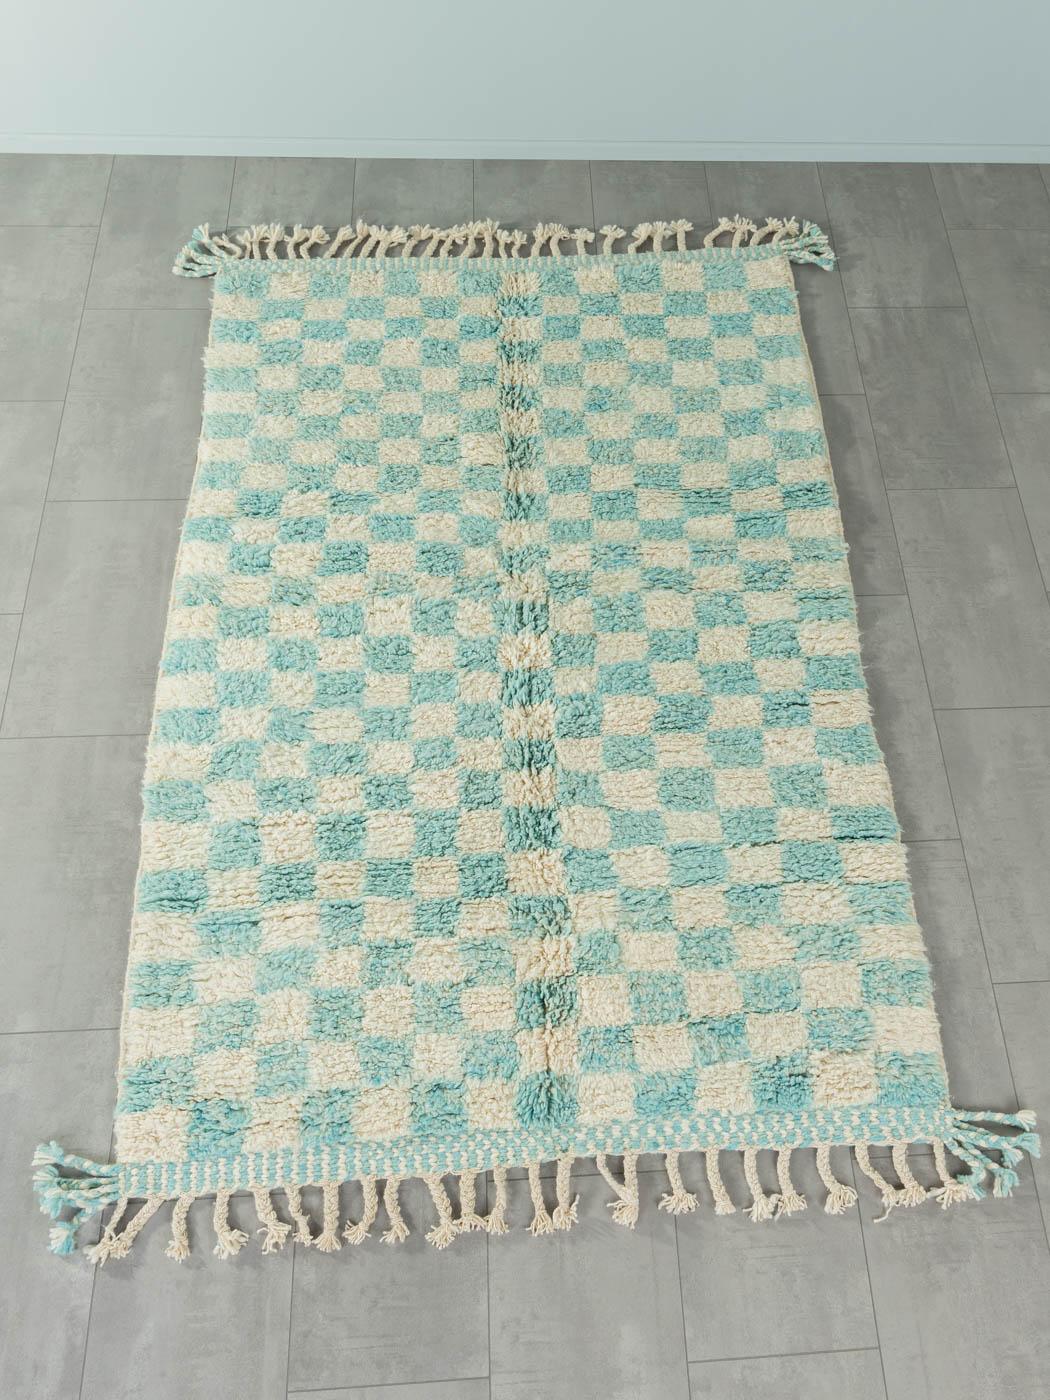 Skyblue Check is a contemporary 100% wool rug – thick and soft, comfortable underfoot. Our Berber rugs are handwoven and handknotted by Amazigh women in the Atlas Mountains. These communities have been crafting rugs for thousands of years. One knot